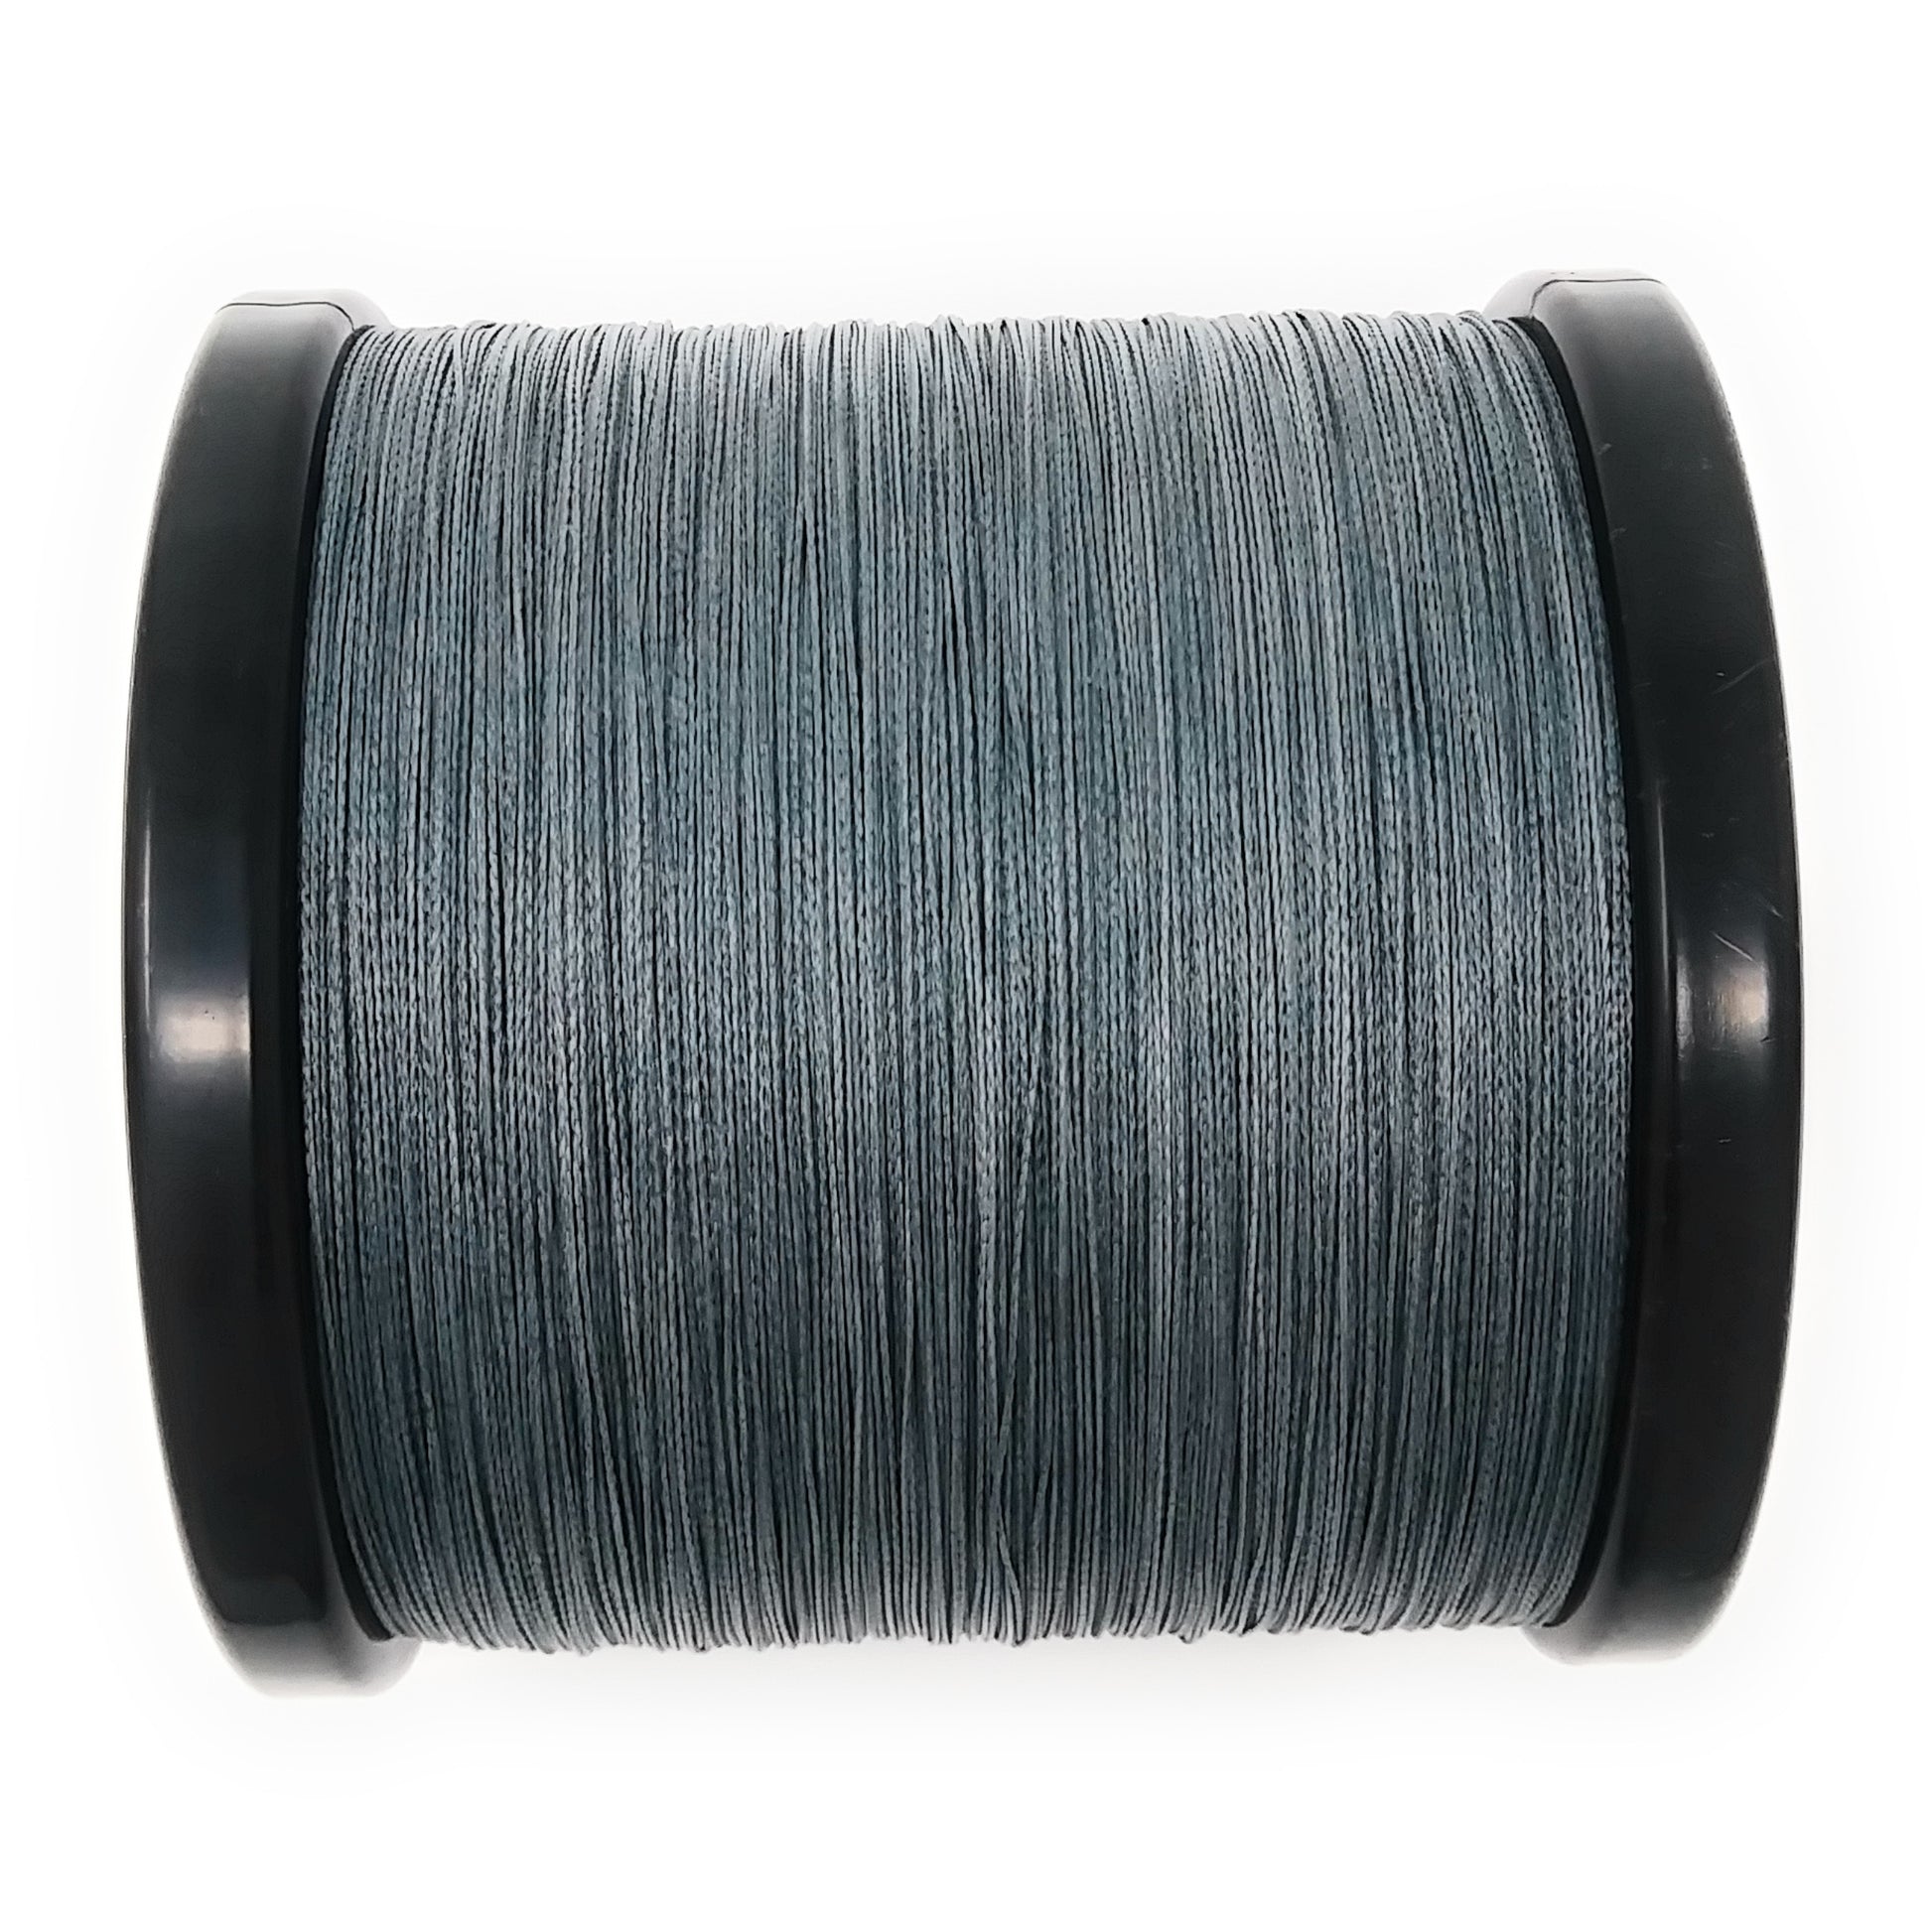 KastKing Extremus Braided Fishing Line,Gray,600Yds,30LB (Color